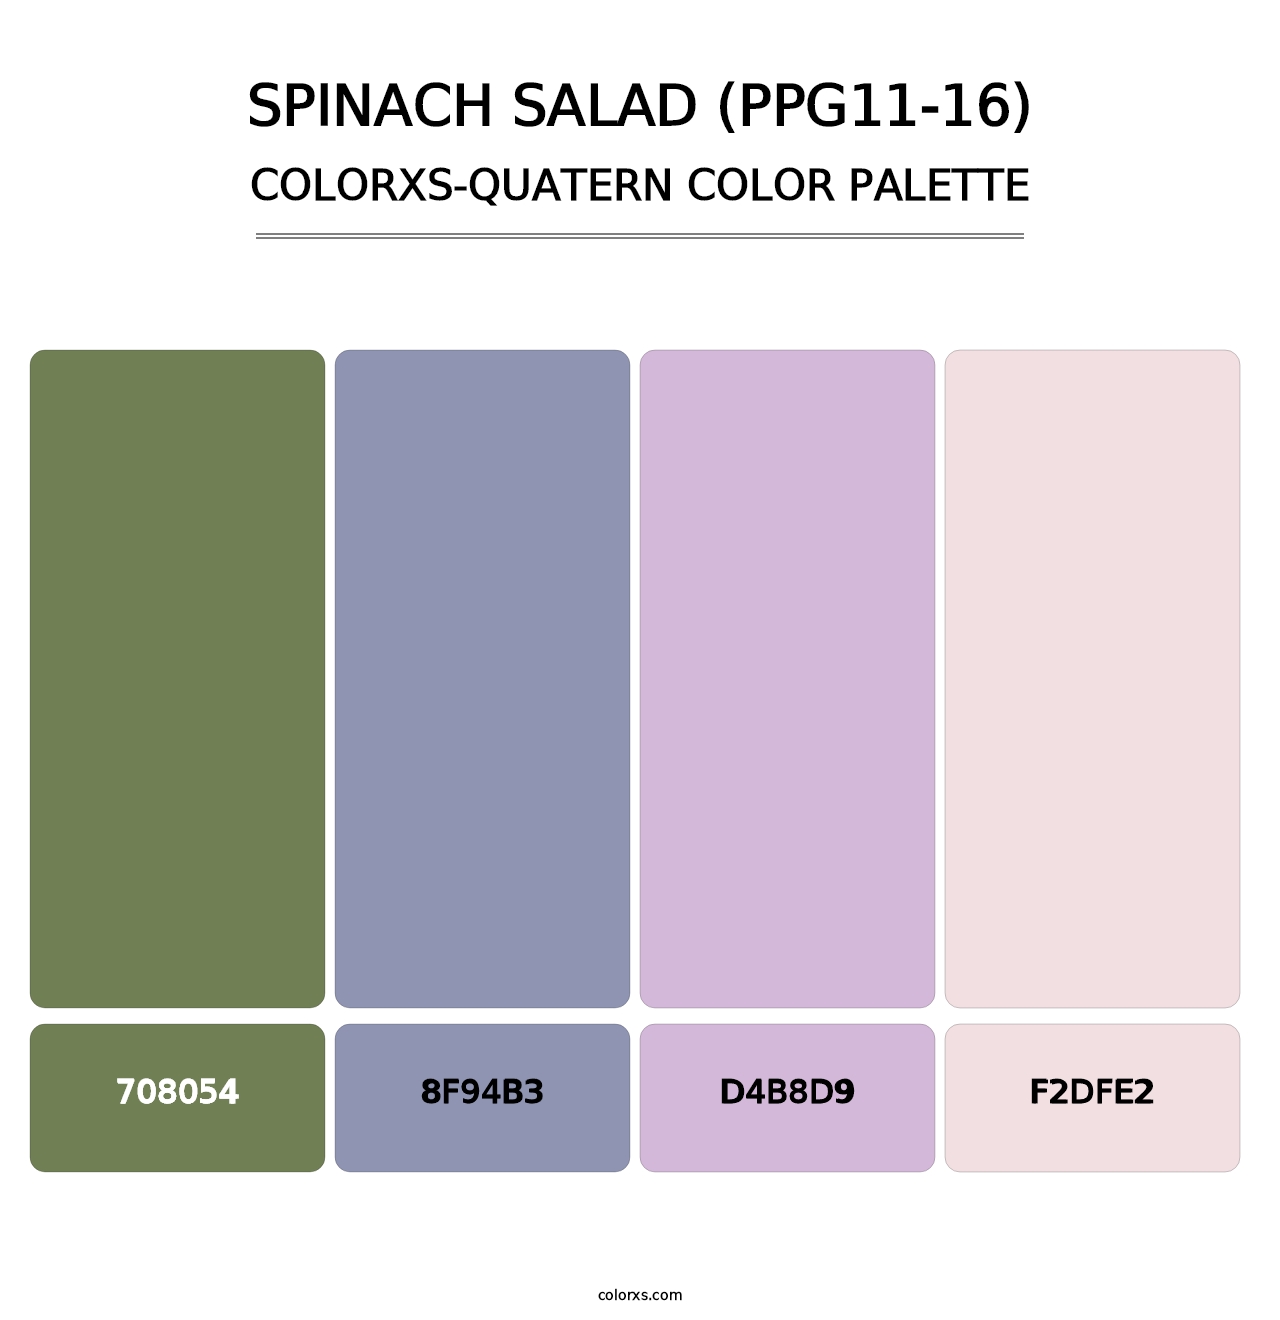 Spinach Salad (PPG11-16) - Colorxs Quatern Palette